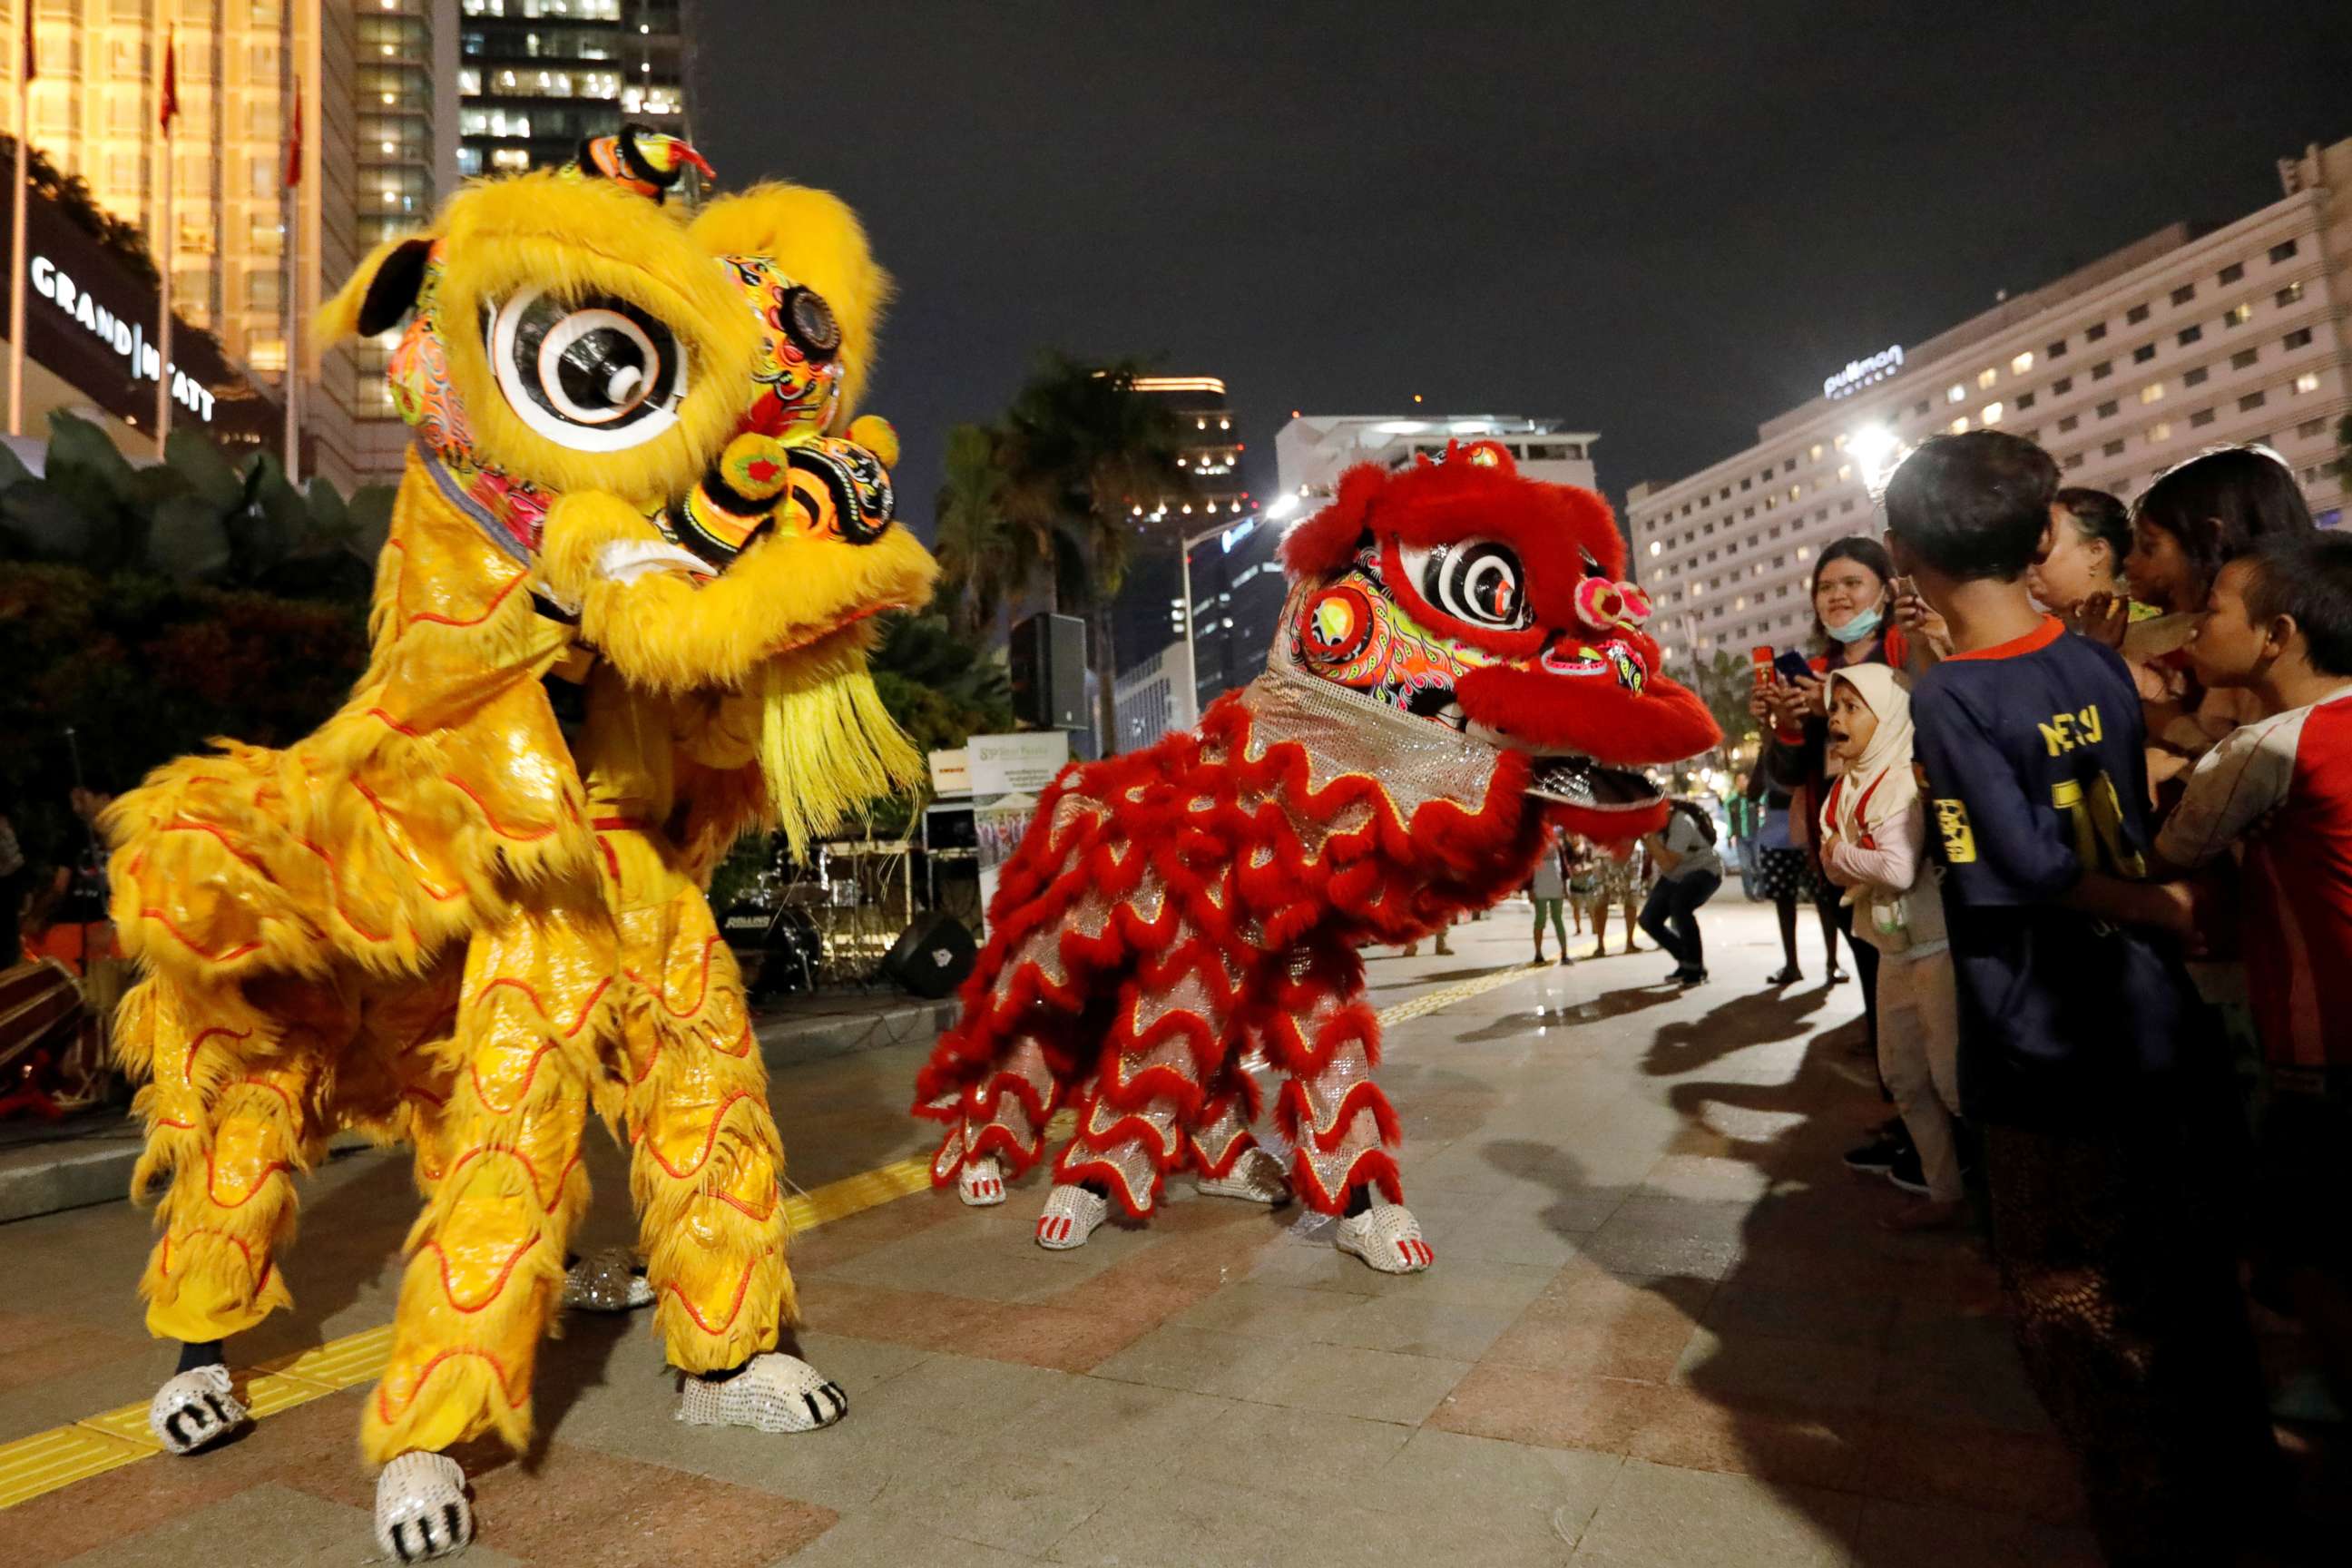 PHOTO: A girl reacts as she watches the lion dance show on the sidewalk during Chinese Lunar New Year celebrations in Jakarta, Indonesia, Jan. 24, 2020.